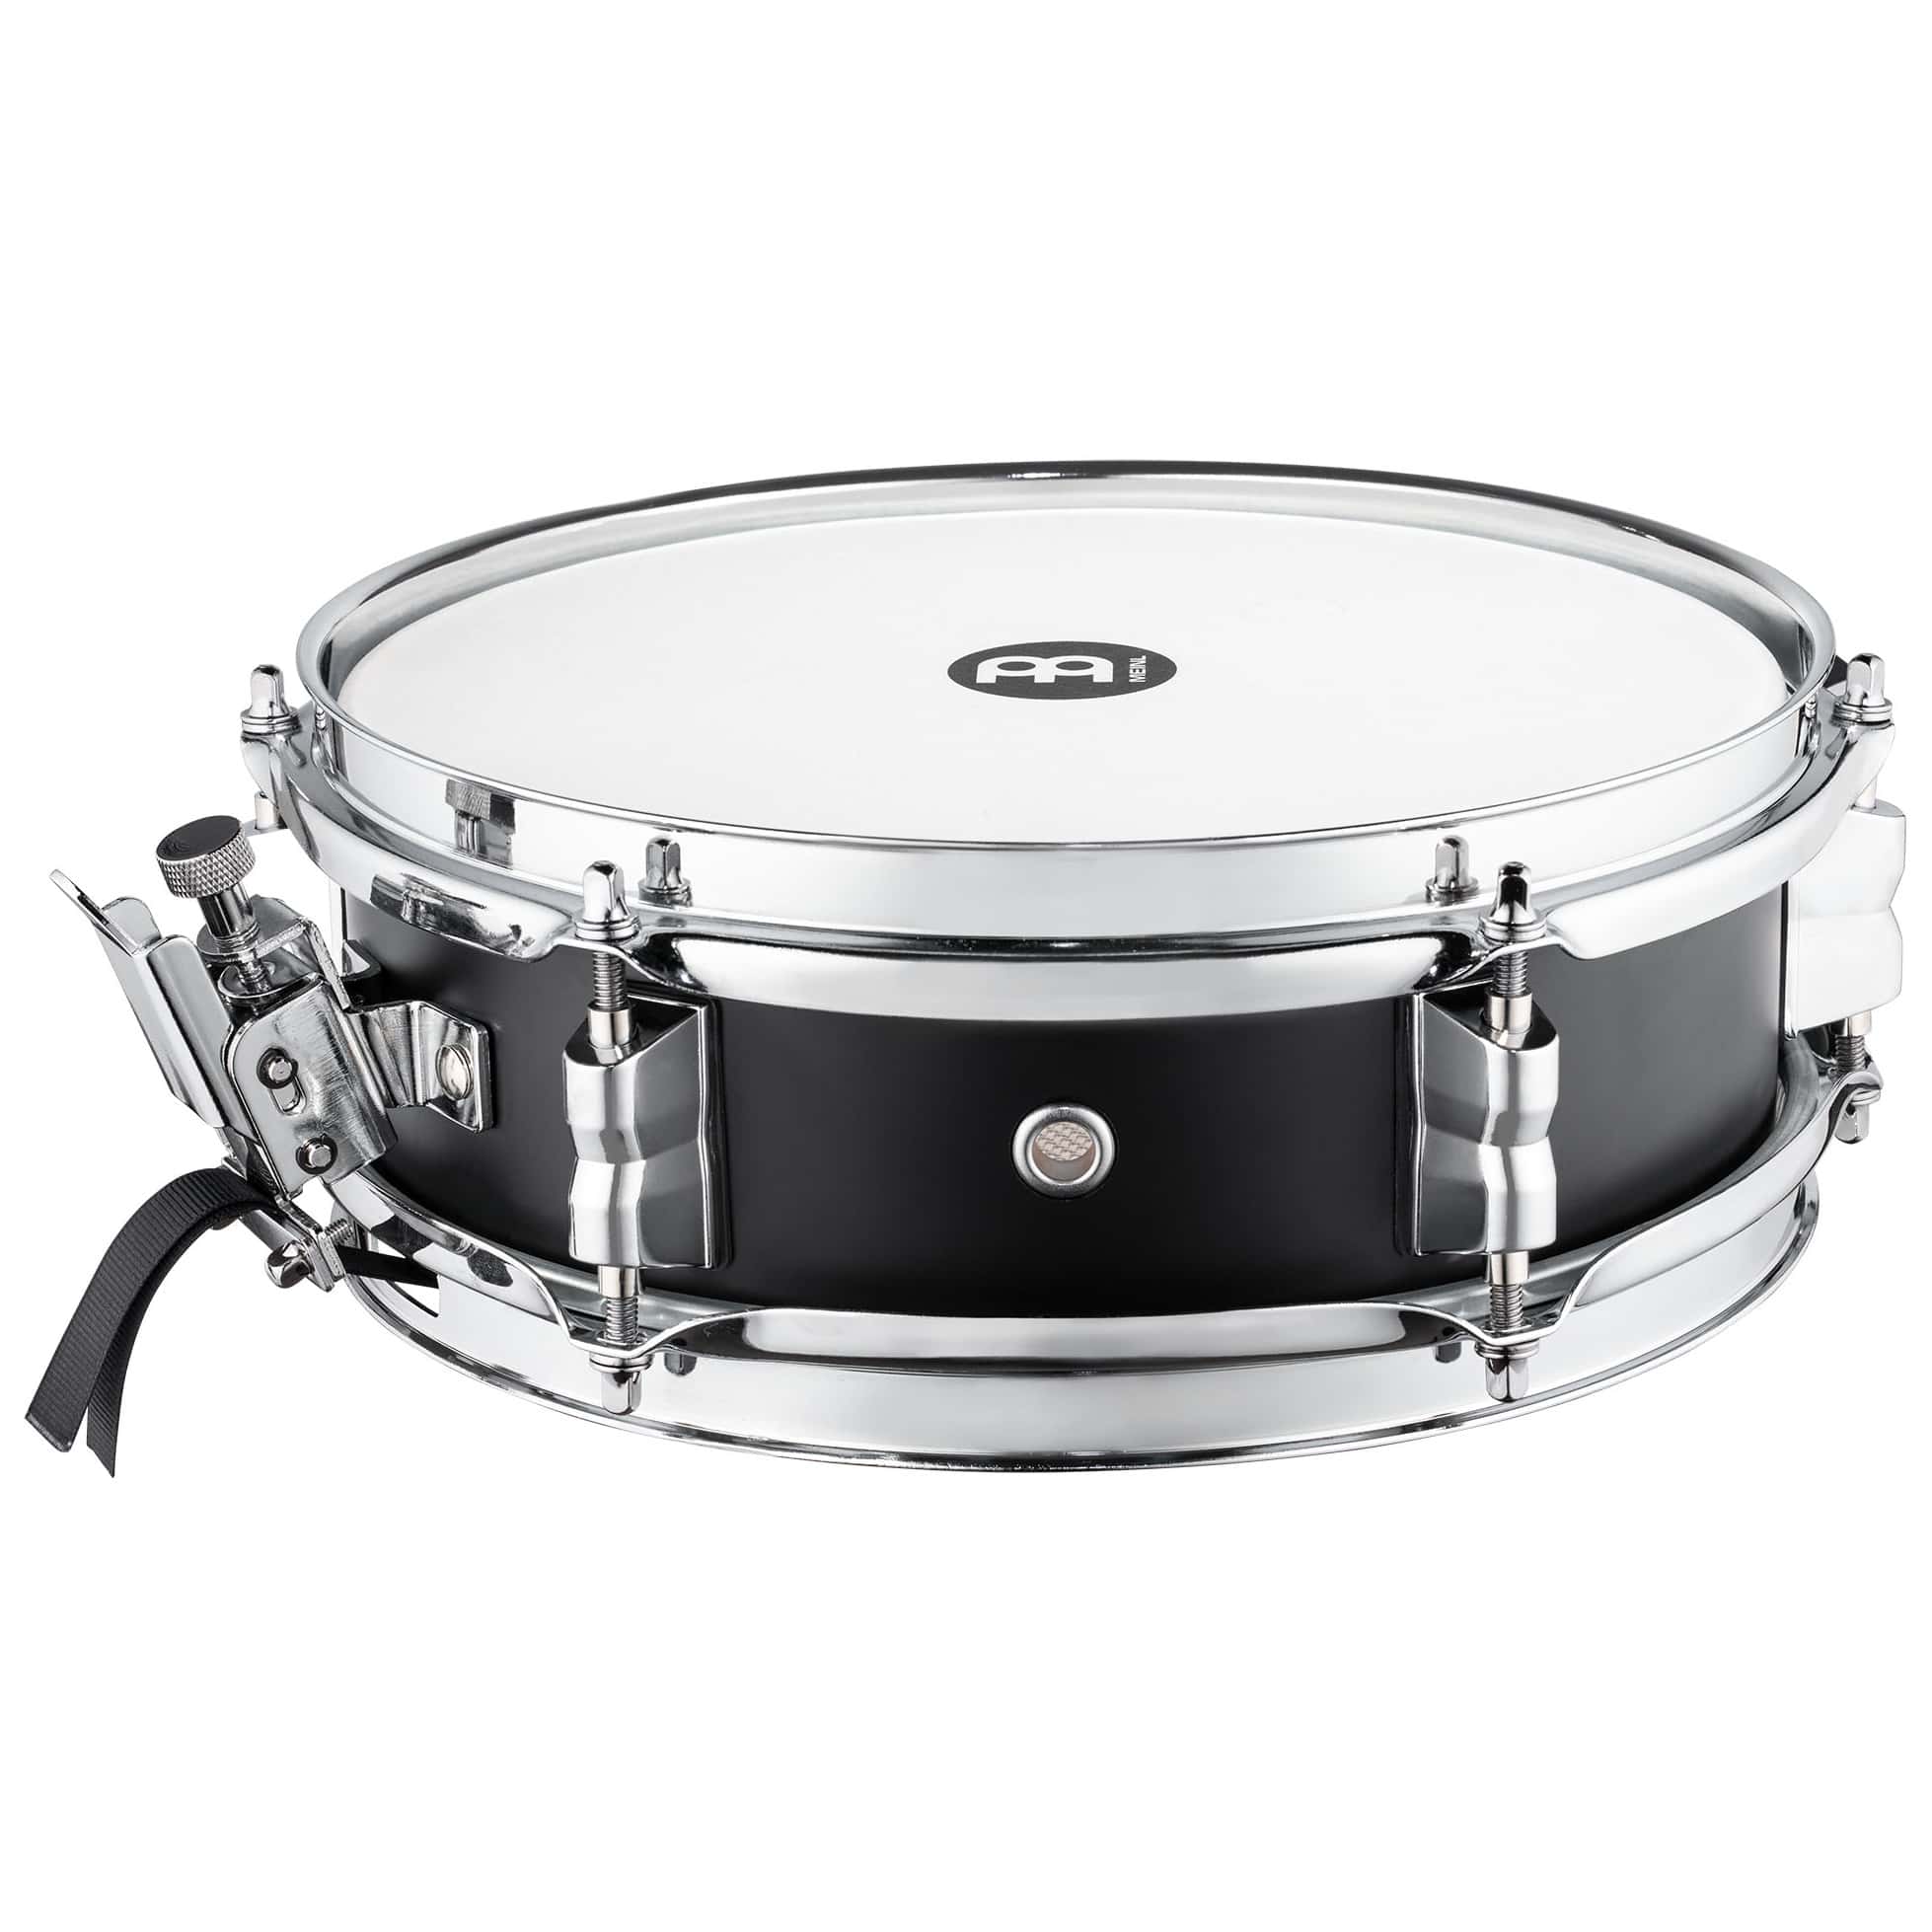 Meinl Percussion MPCSS - Compact Side Snare Drum 10"